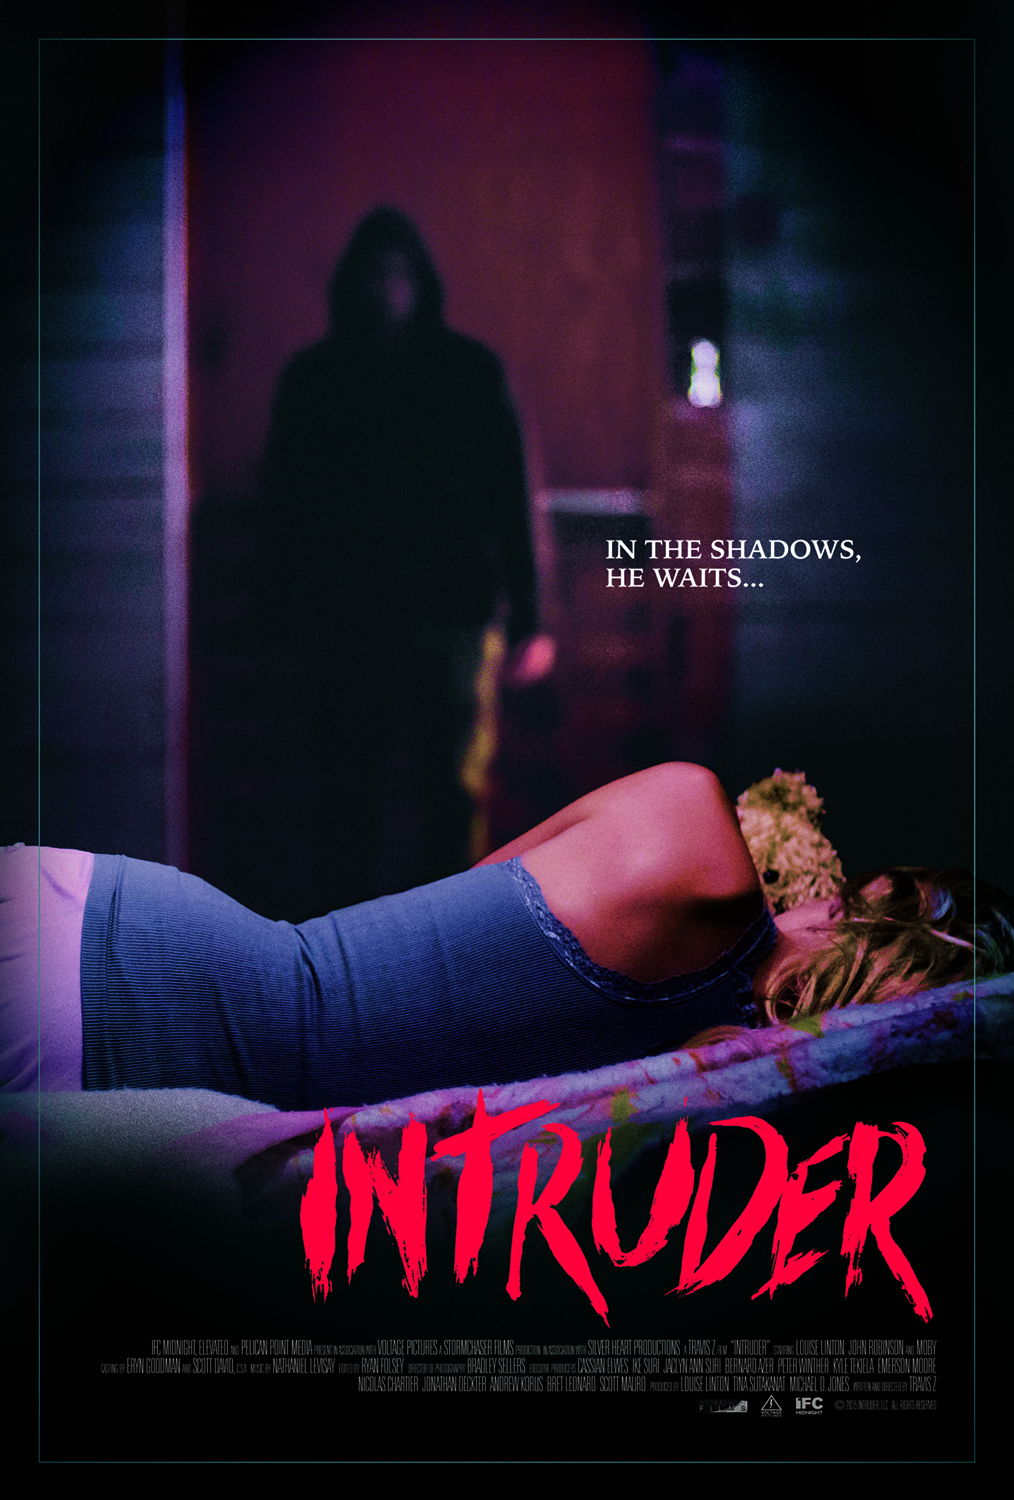 The Horror Club: VOD Review: Intruders (2016)